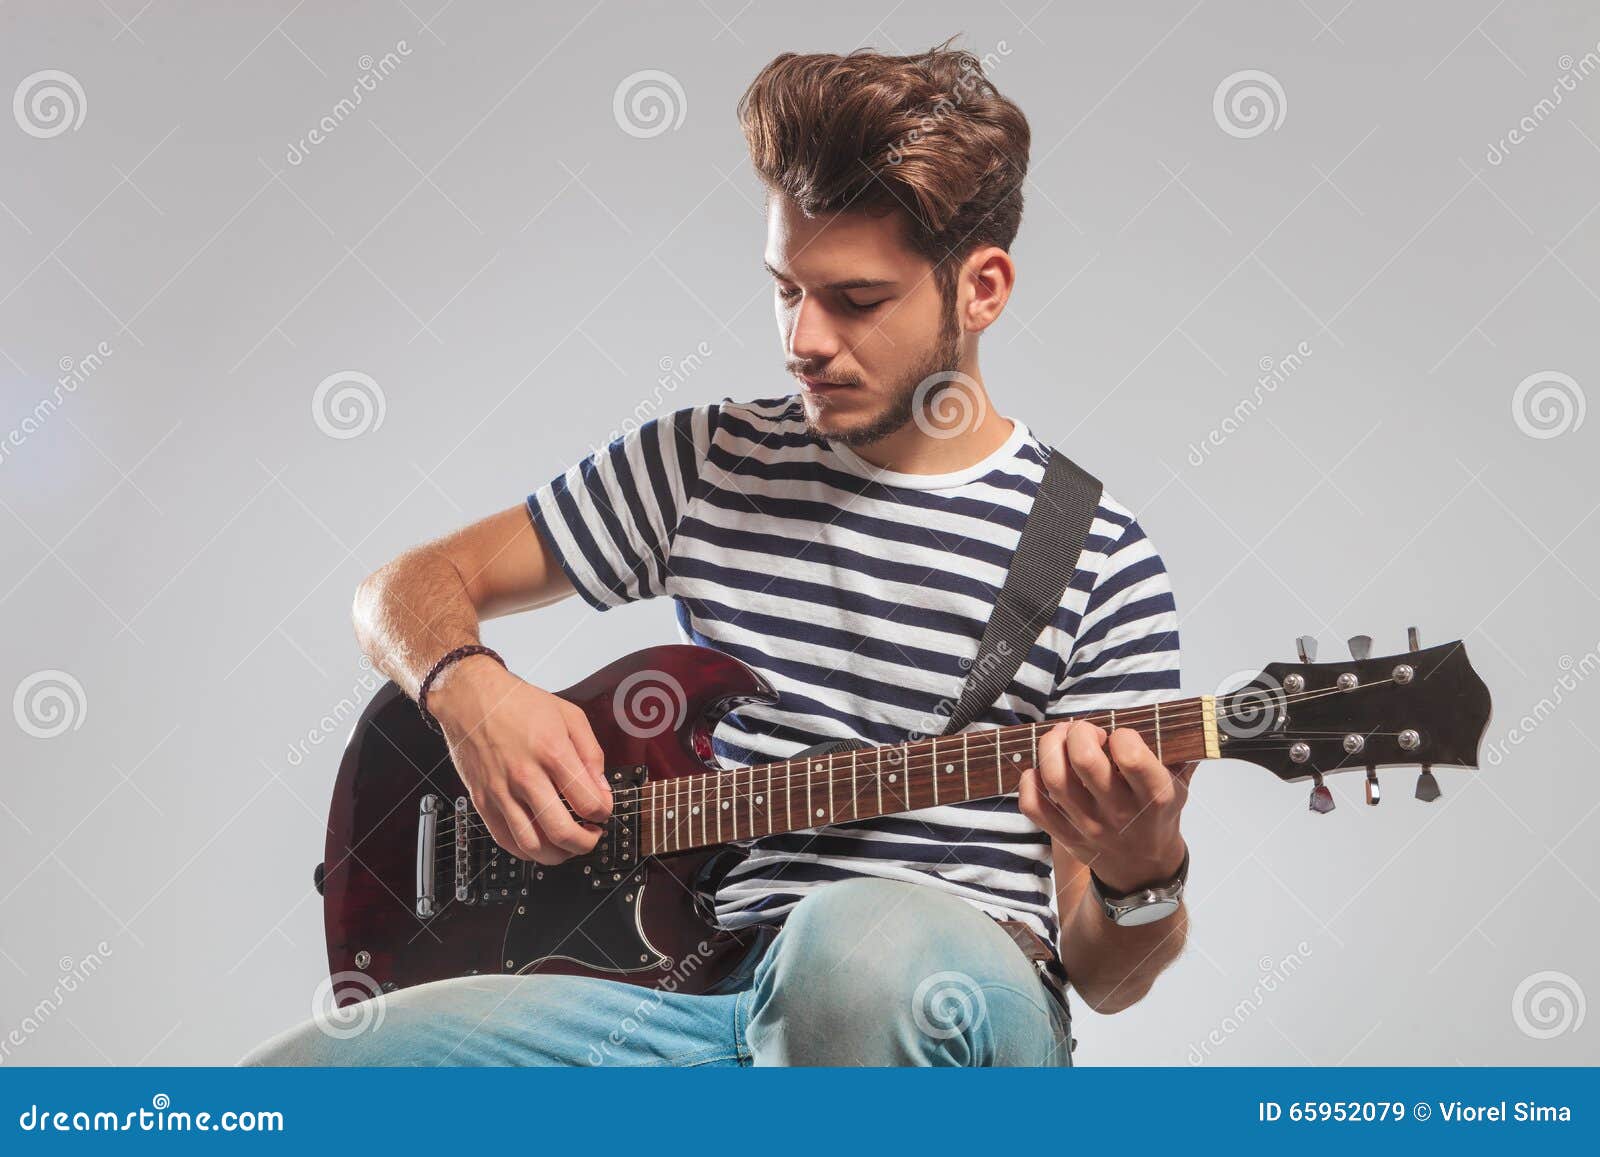 Image of Indian Young Man Sitting And Posing With a Guitar-DU415946-Picxy